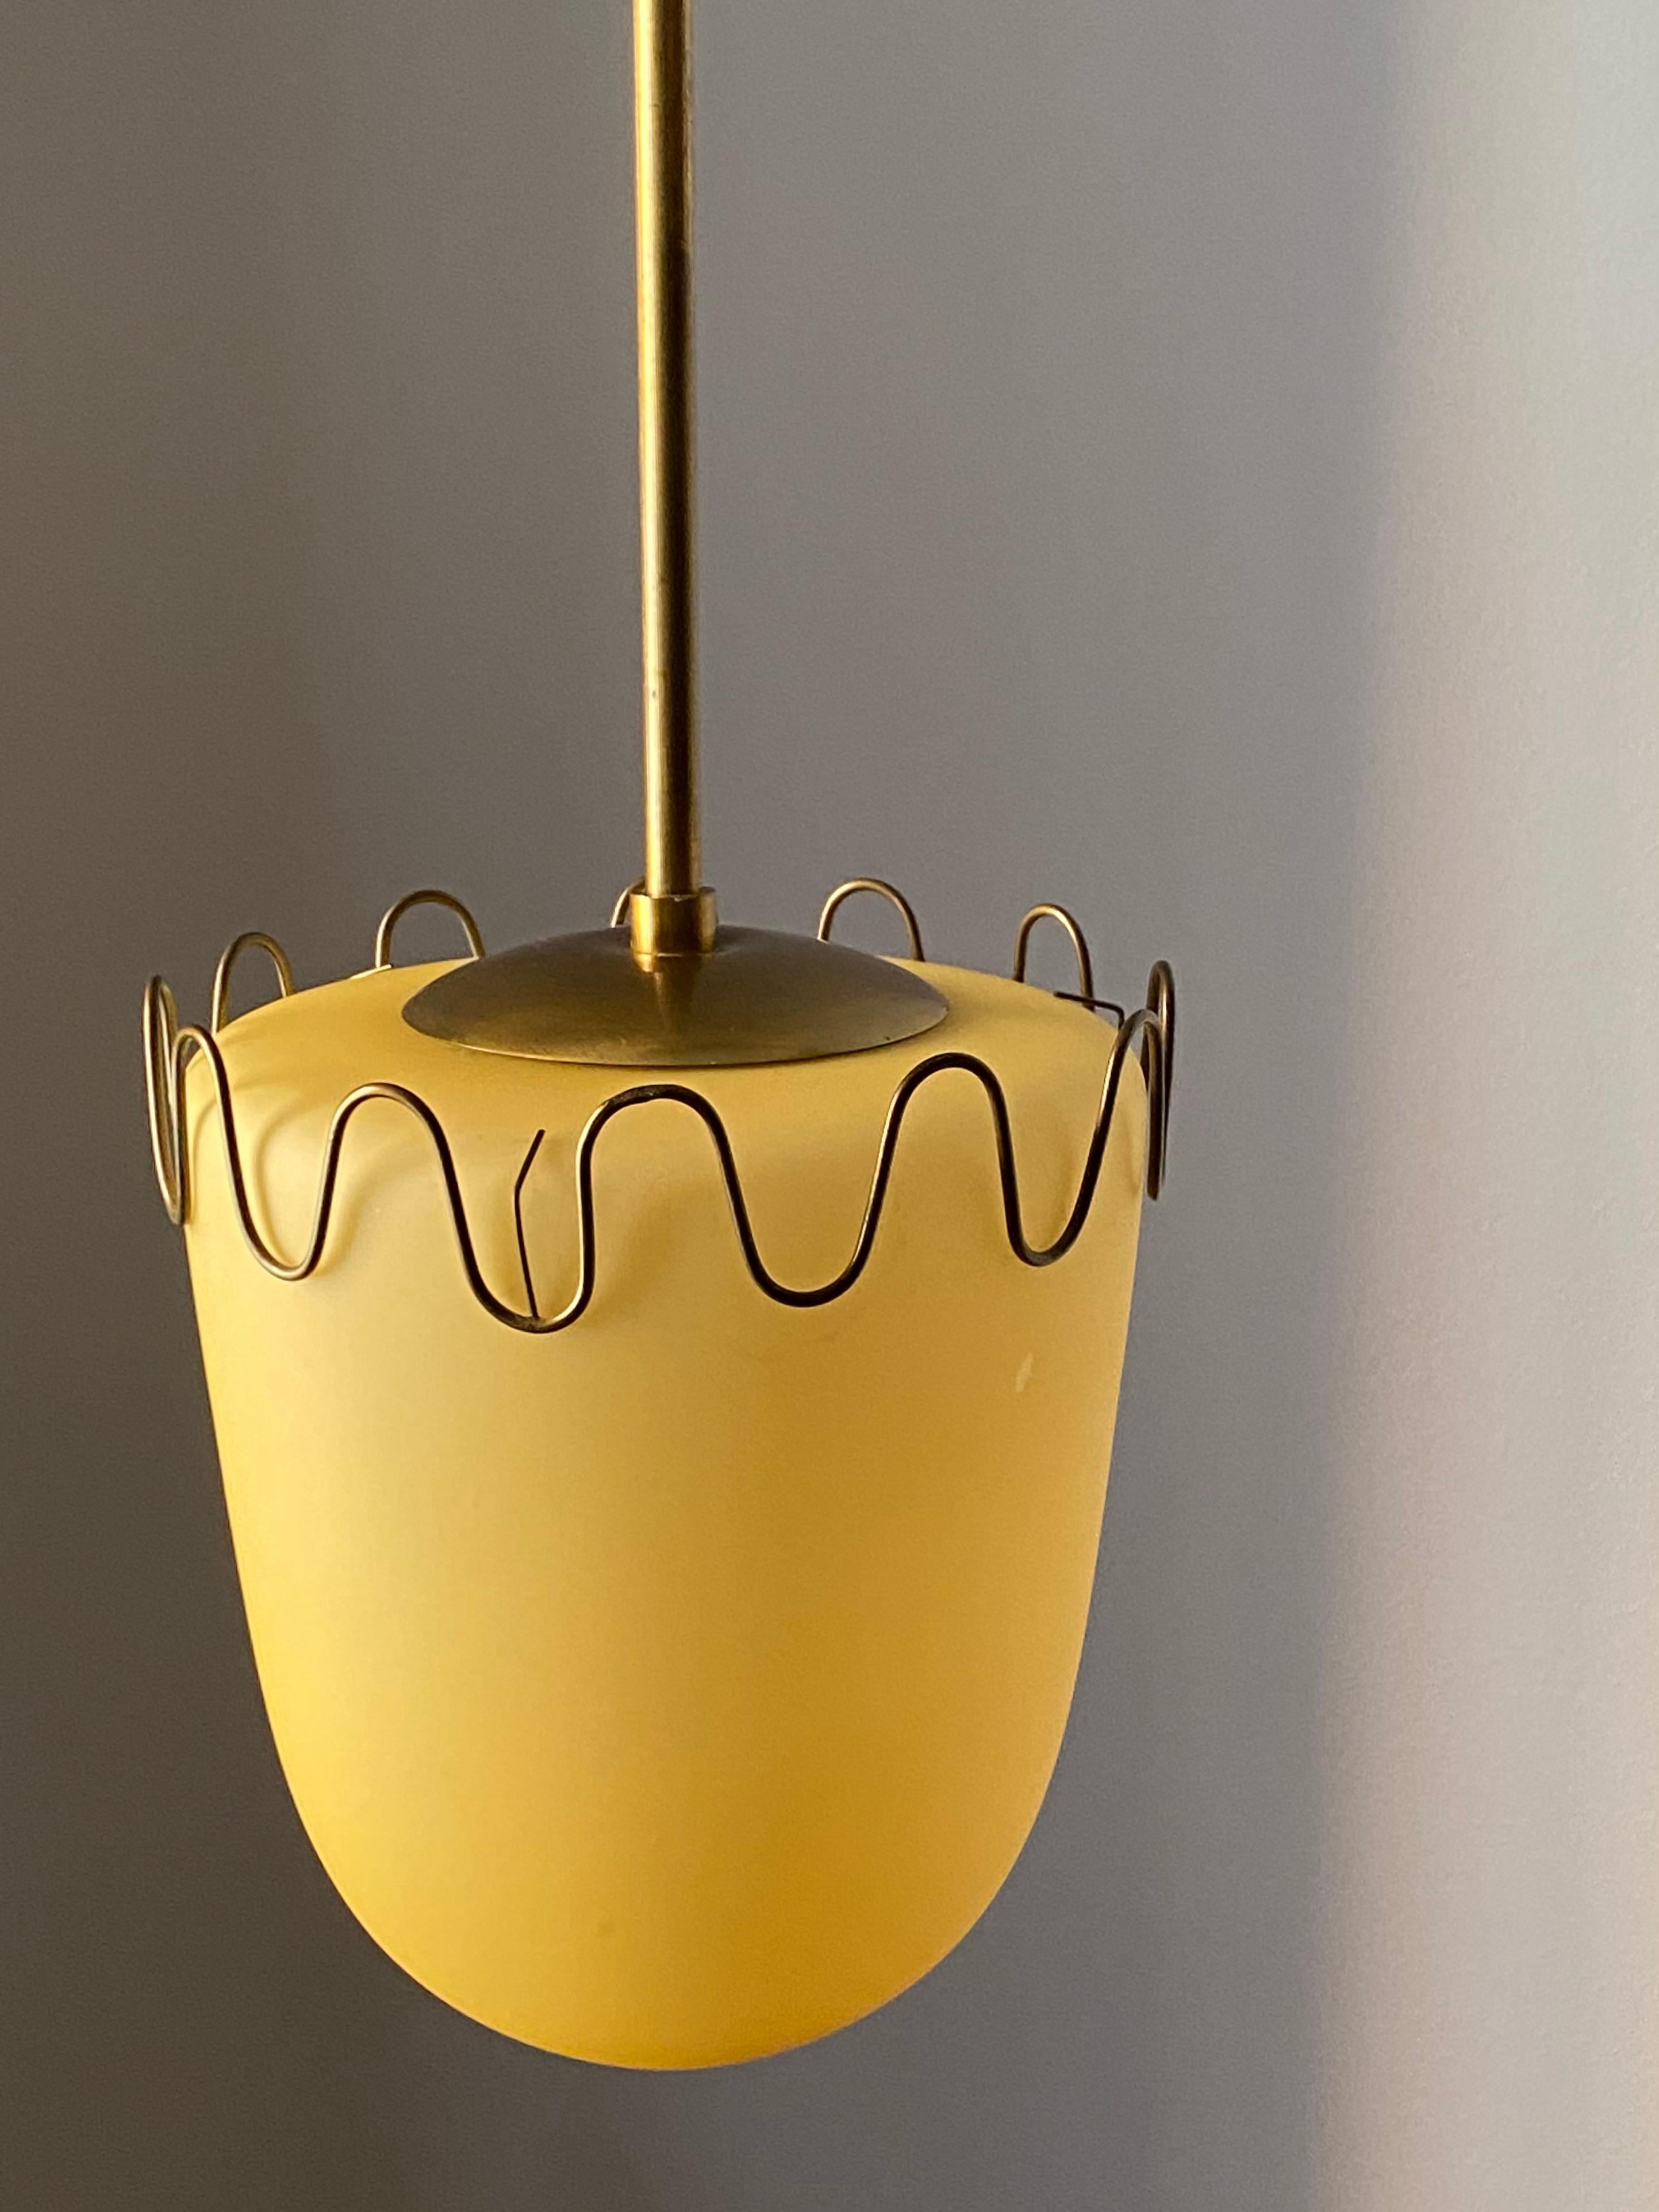 Mid-20th Century Swedish, Small Functionalist Pendant Light, Brass, Colored Glass, Sweden, 1940s